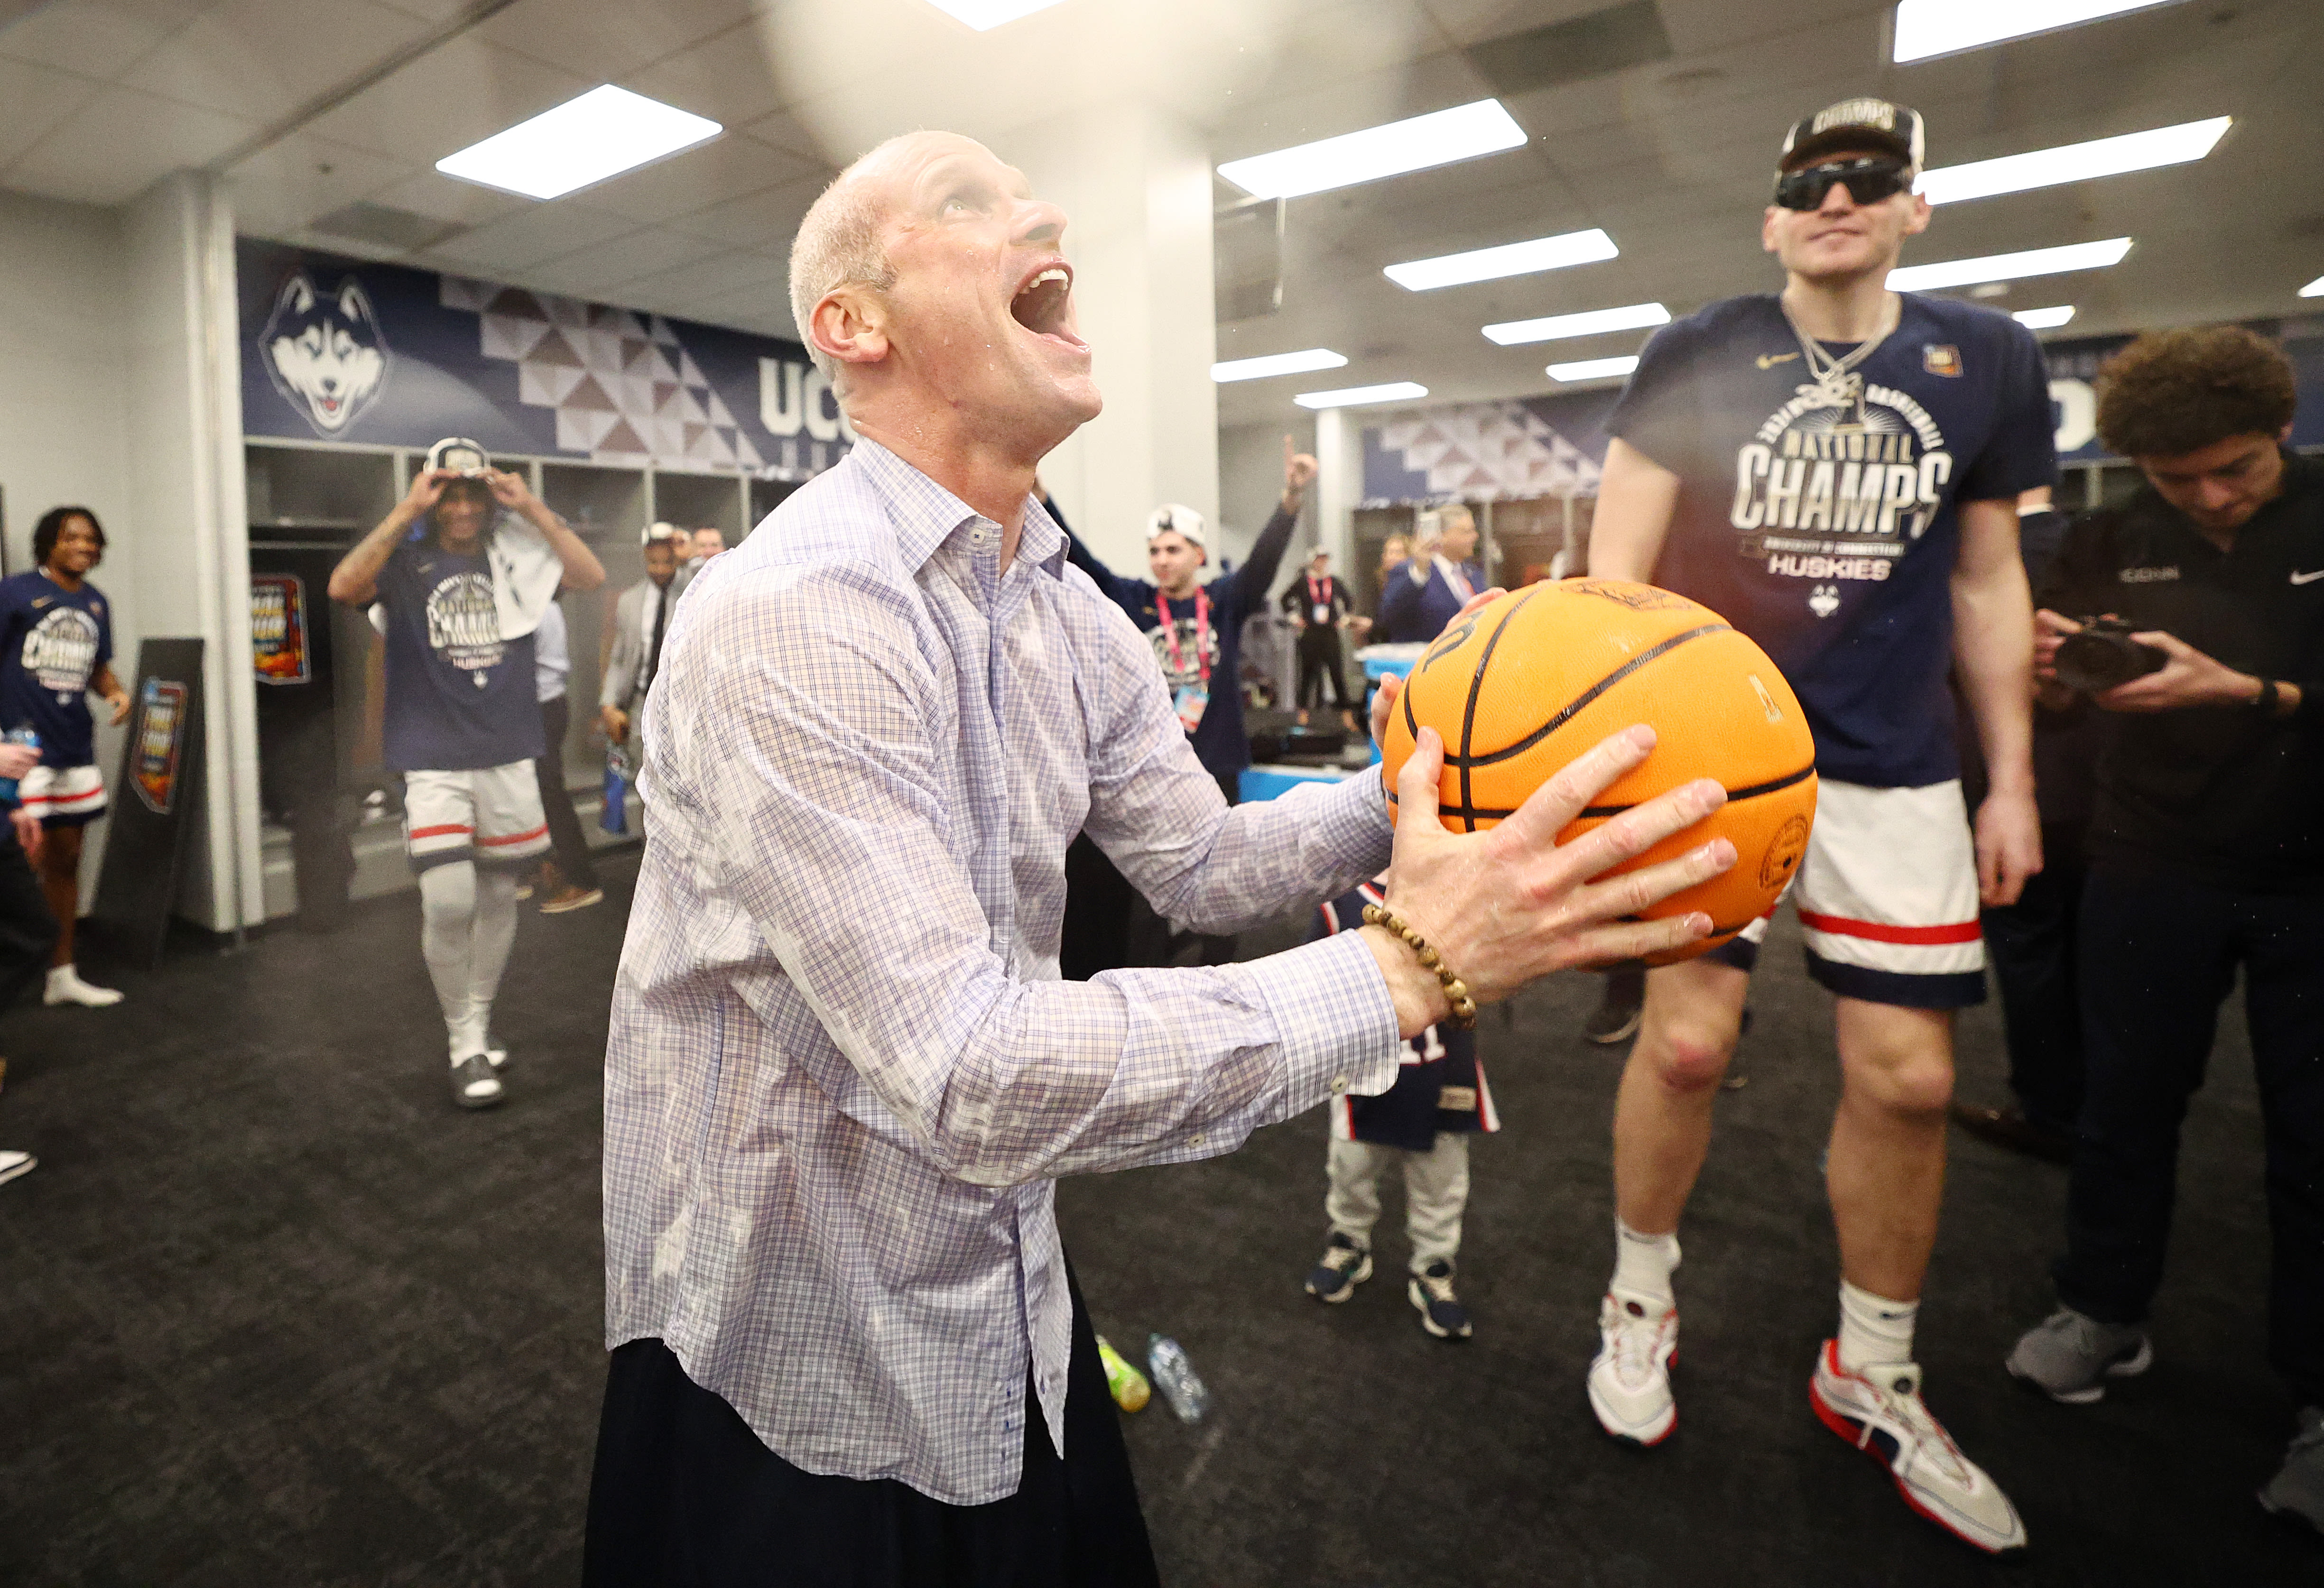 Dan Hurley: From a bingo hall to coach of the Los Angles Lakers?